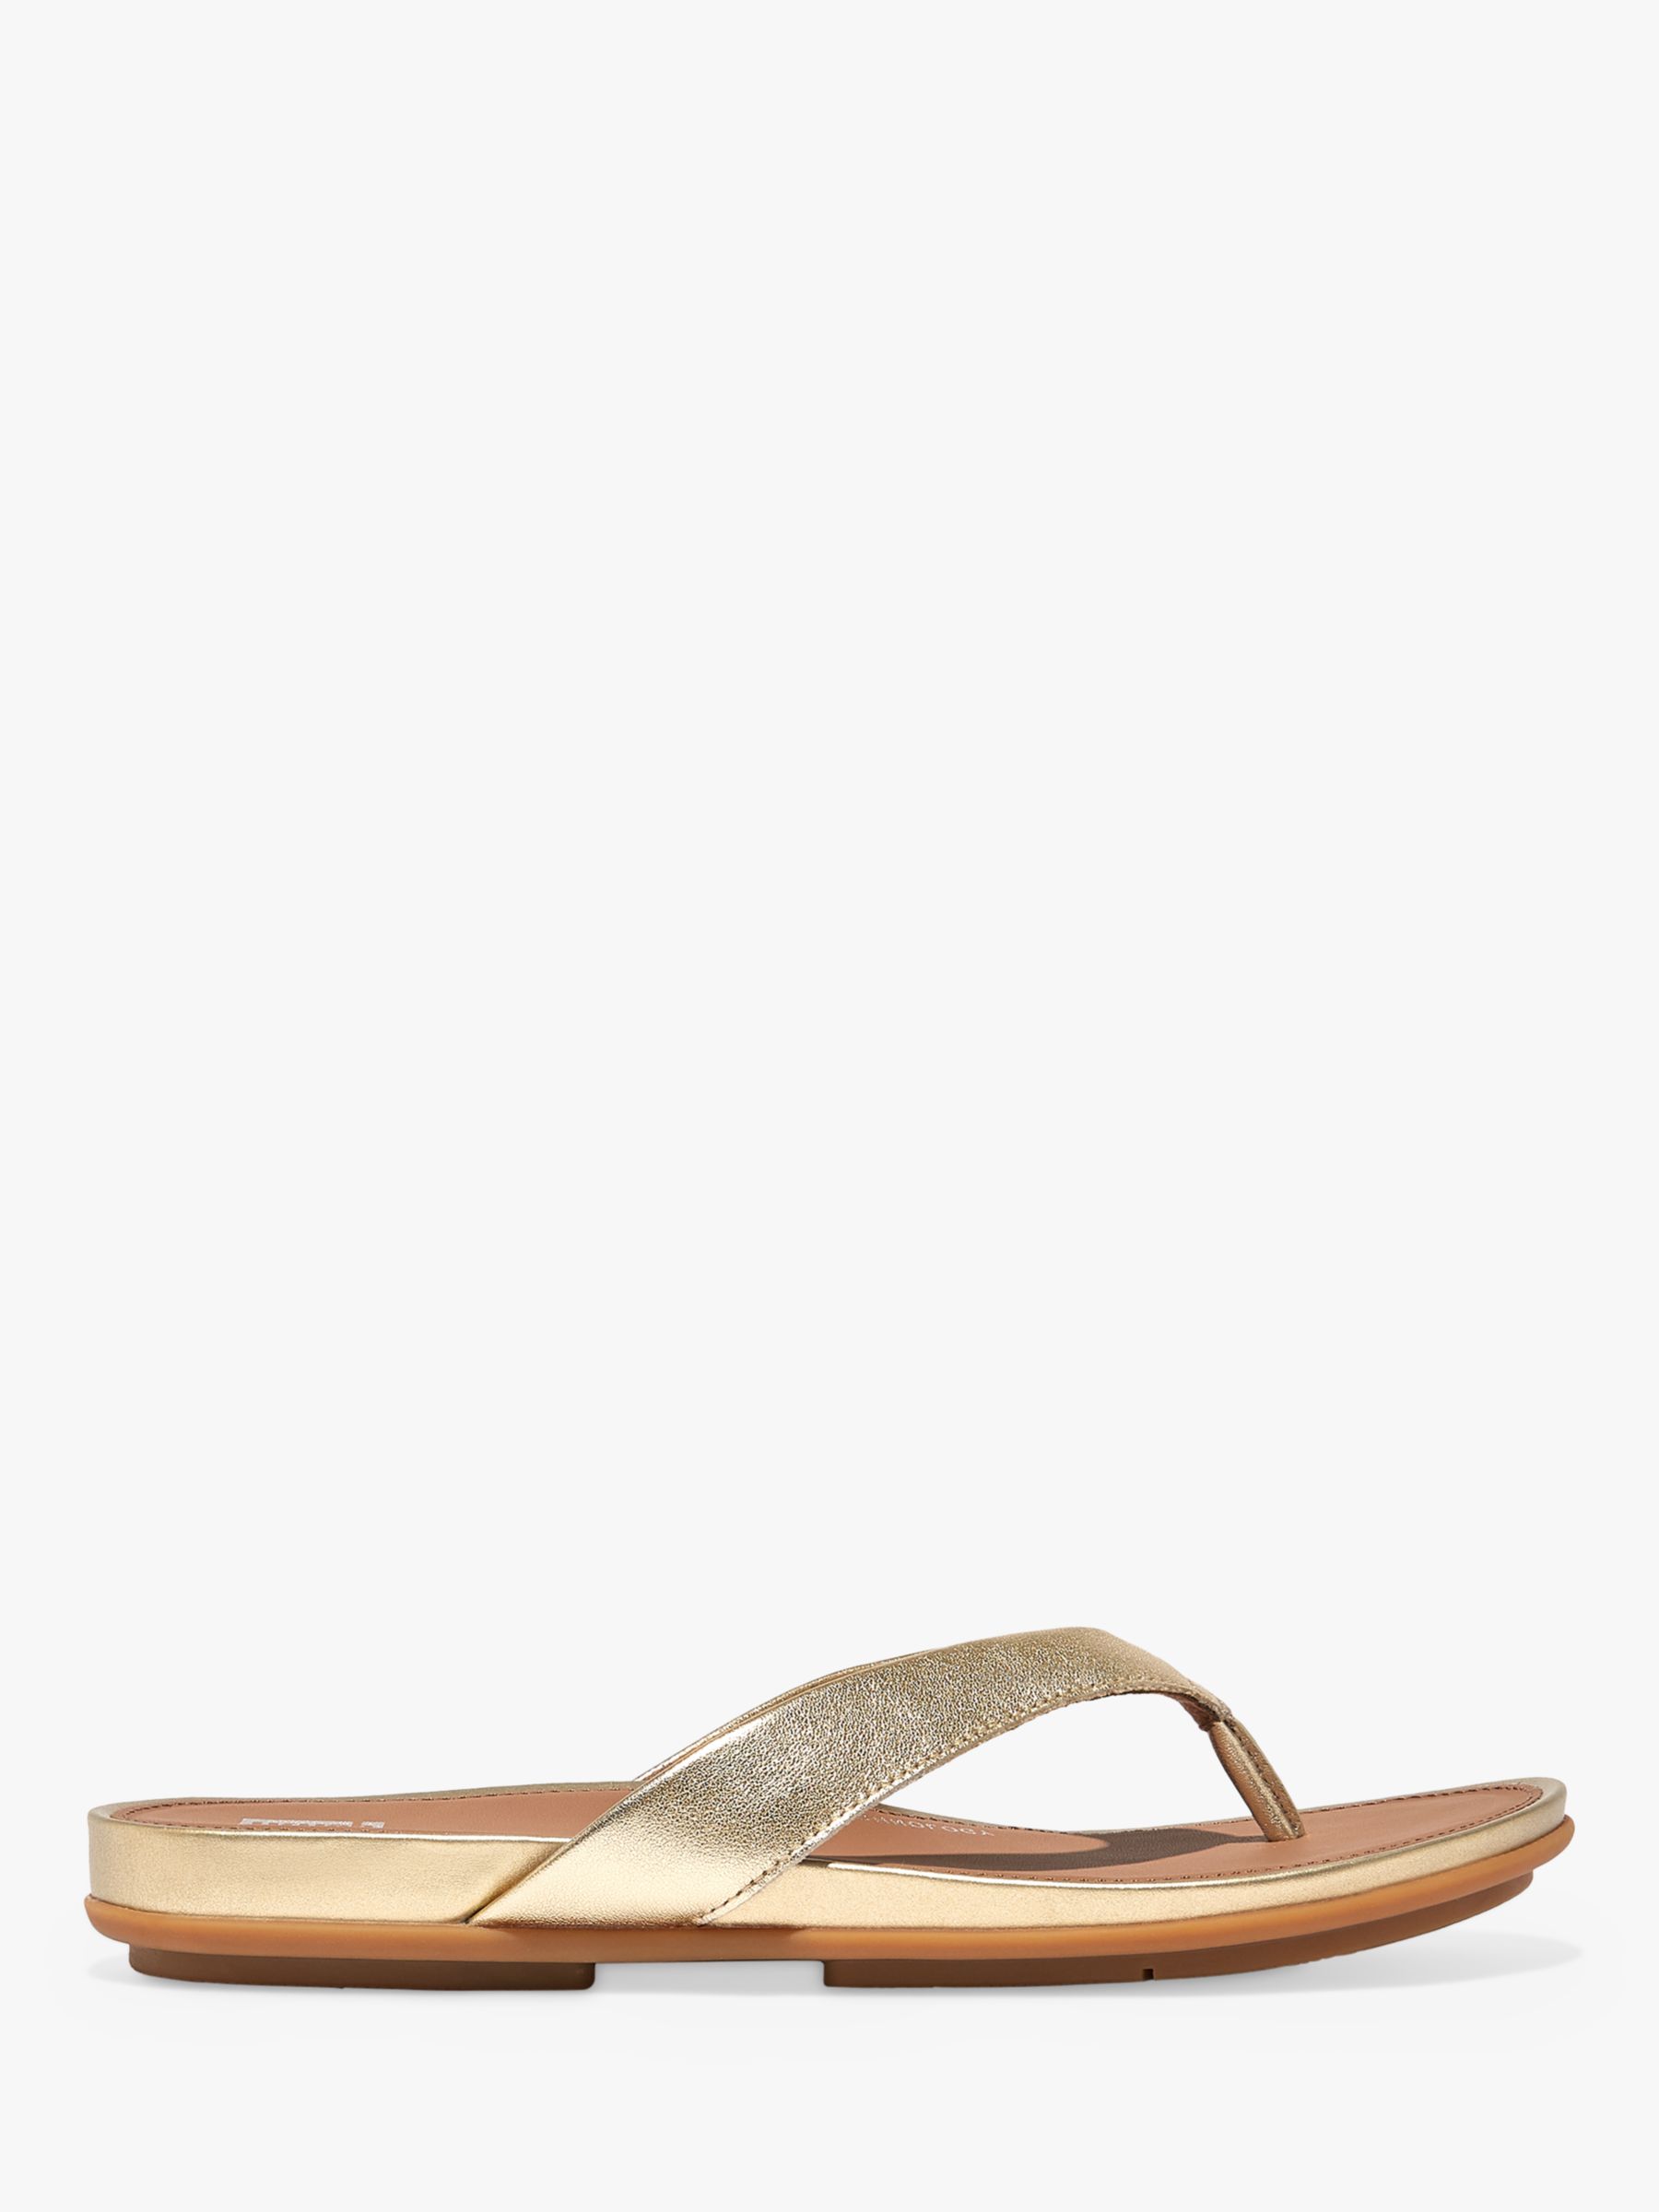 FitFlop Gracie Leather Flip Flops, Platino at John Lewis & Partners